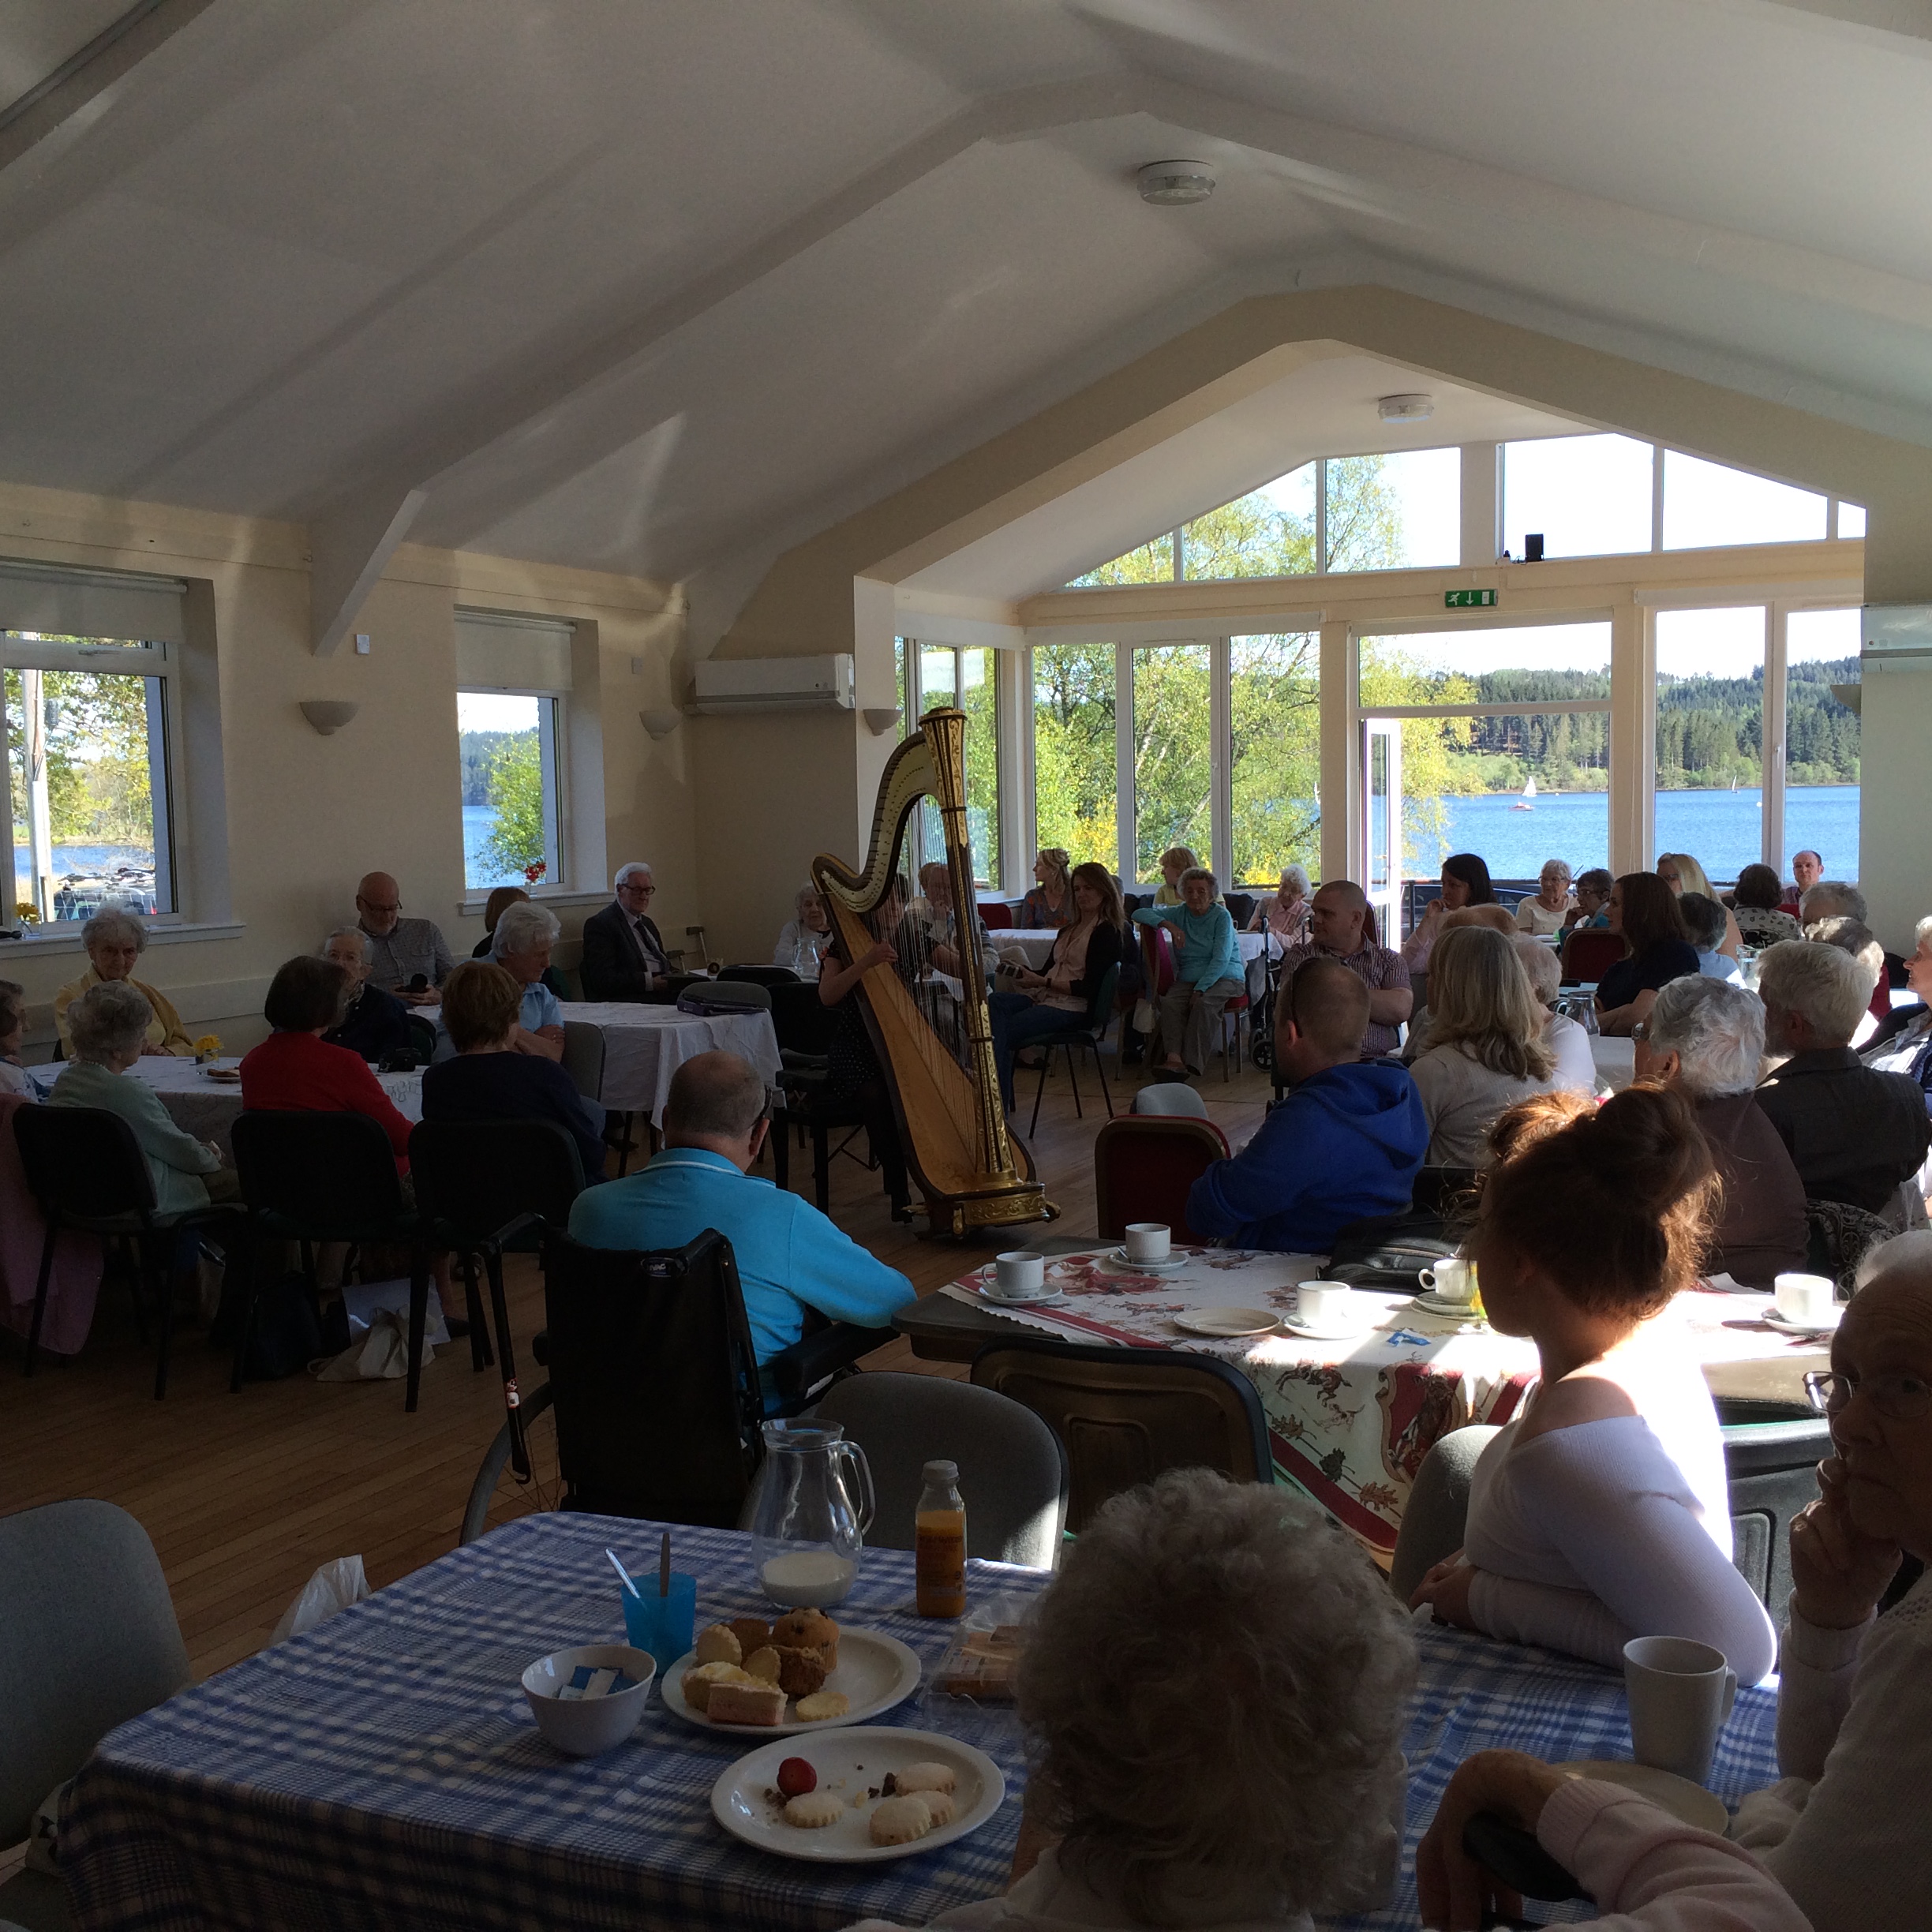 Enjoying the sunshine at Kinlochard village hall for my (now annual) spot at the Contact the Elderly birthday tea party